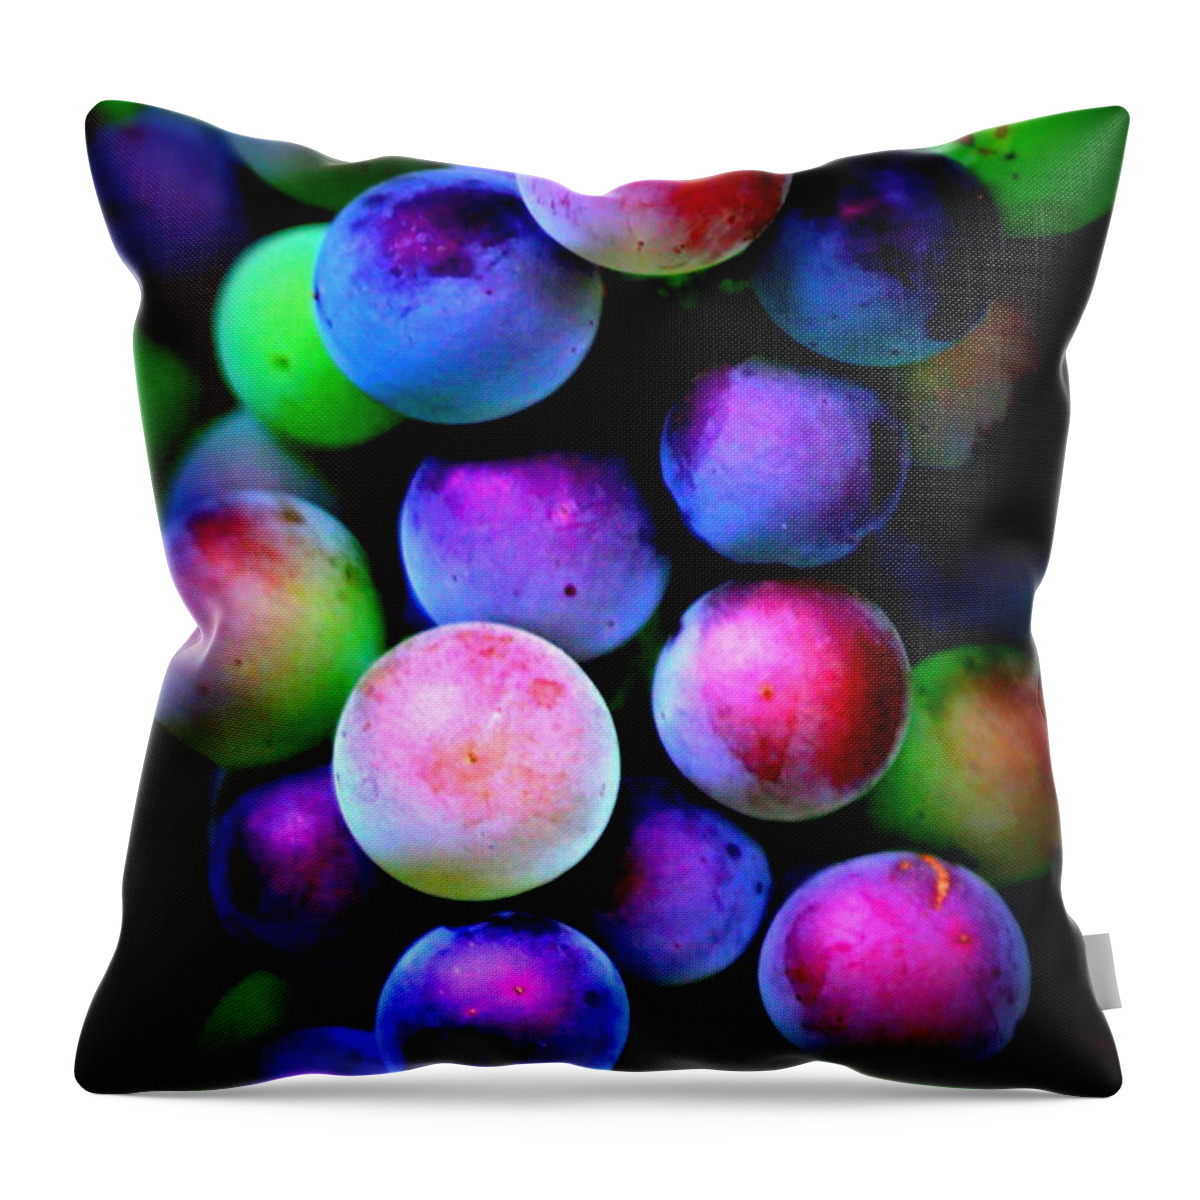 Grapes Throw Pillow featuring the photograph Colorful Grapes - Digital Art by Carol Groenen